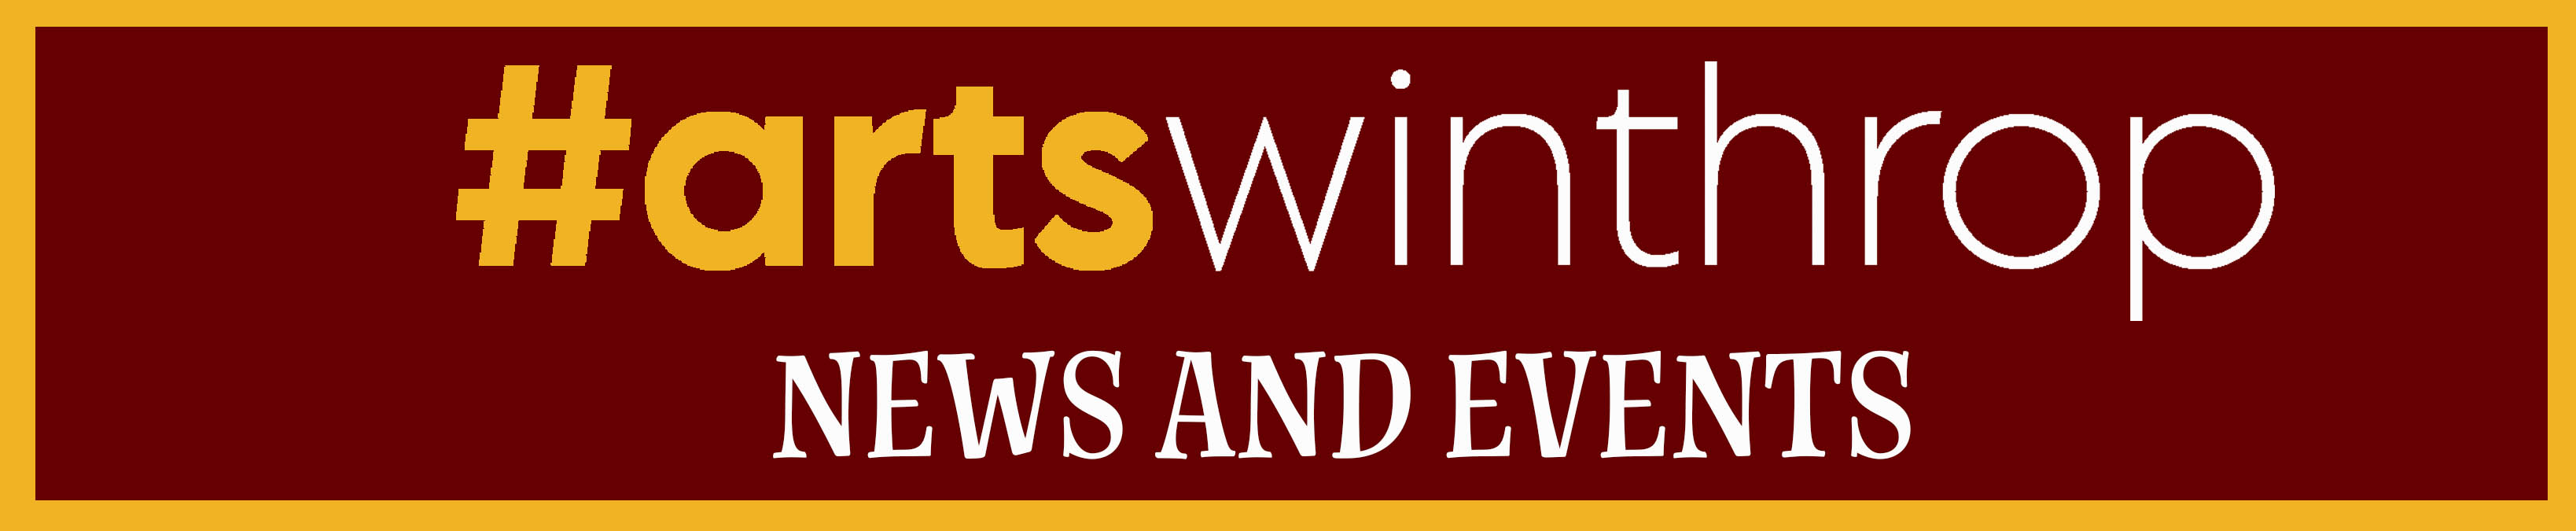 artsWinthrop News and Events